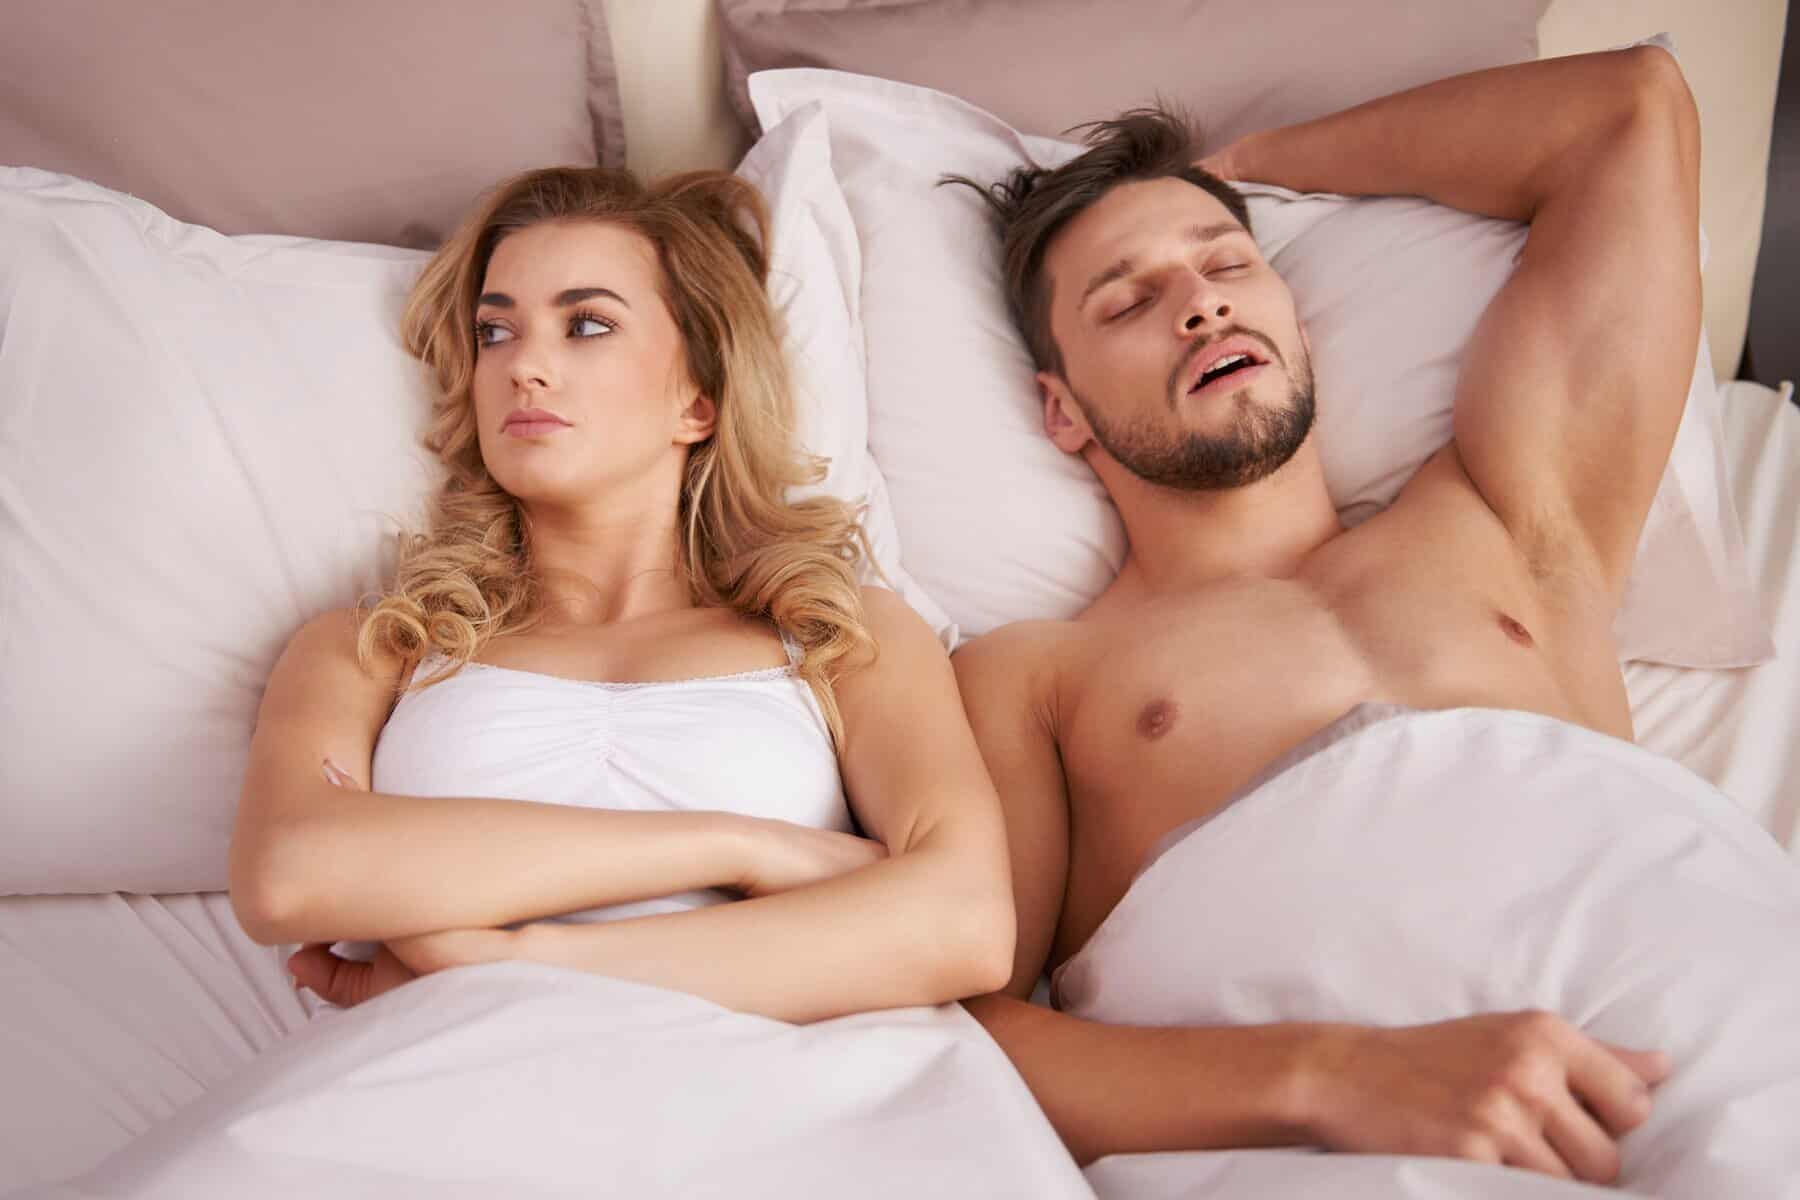 How To Stop Snoring| Tips to Help You Sleep Better